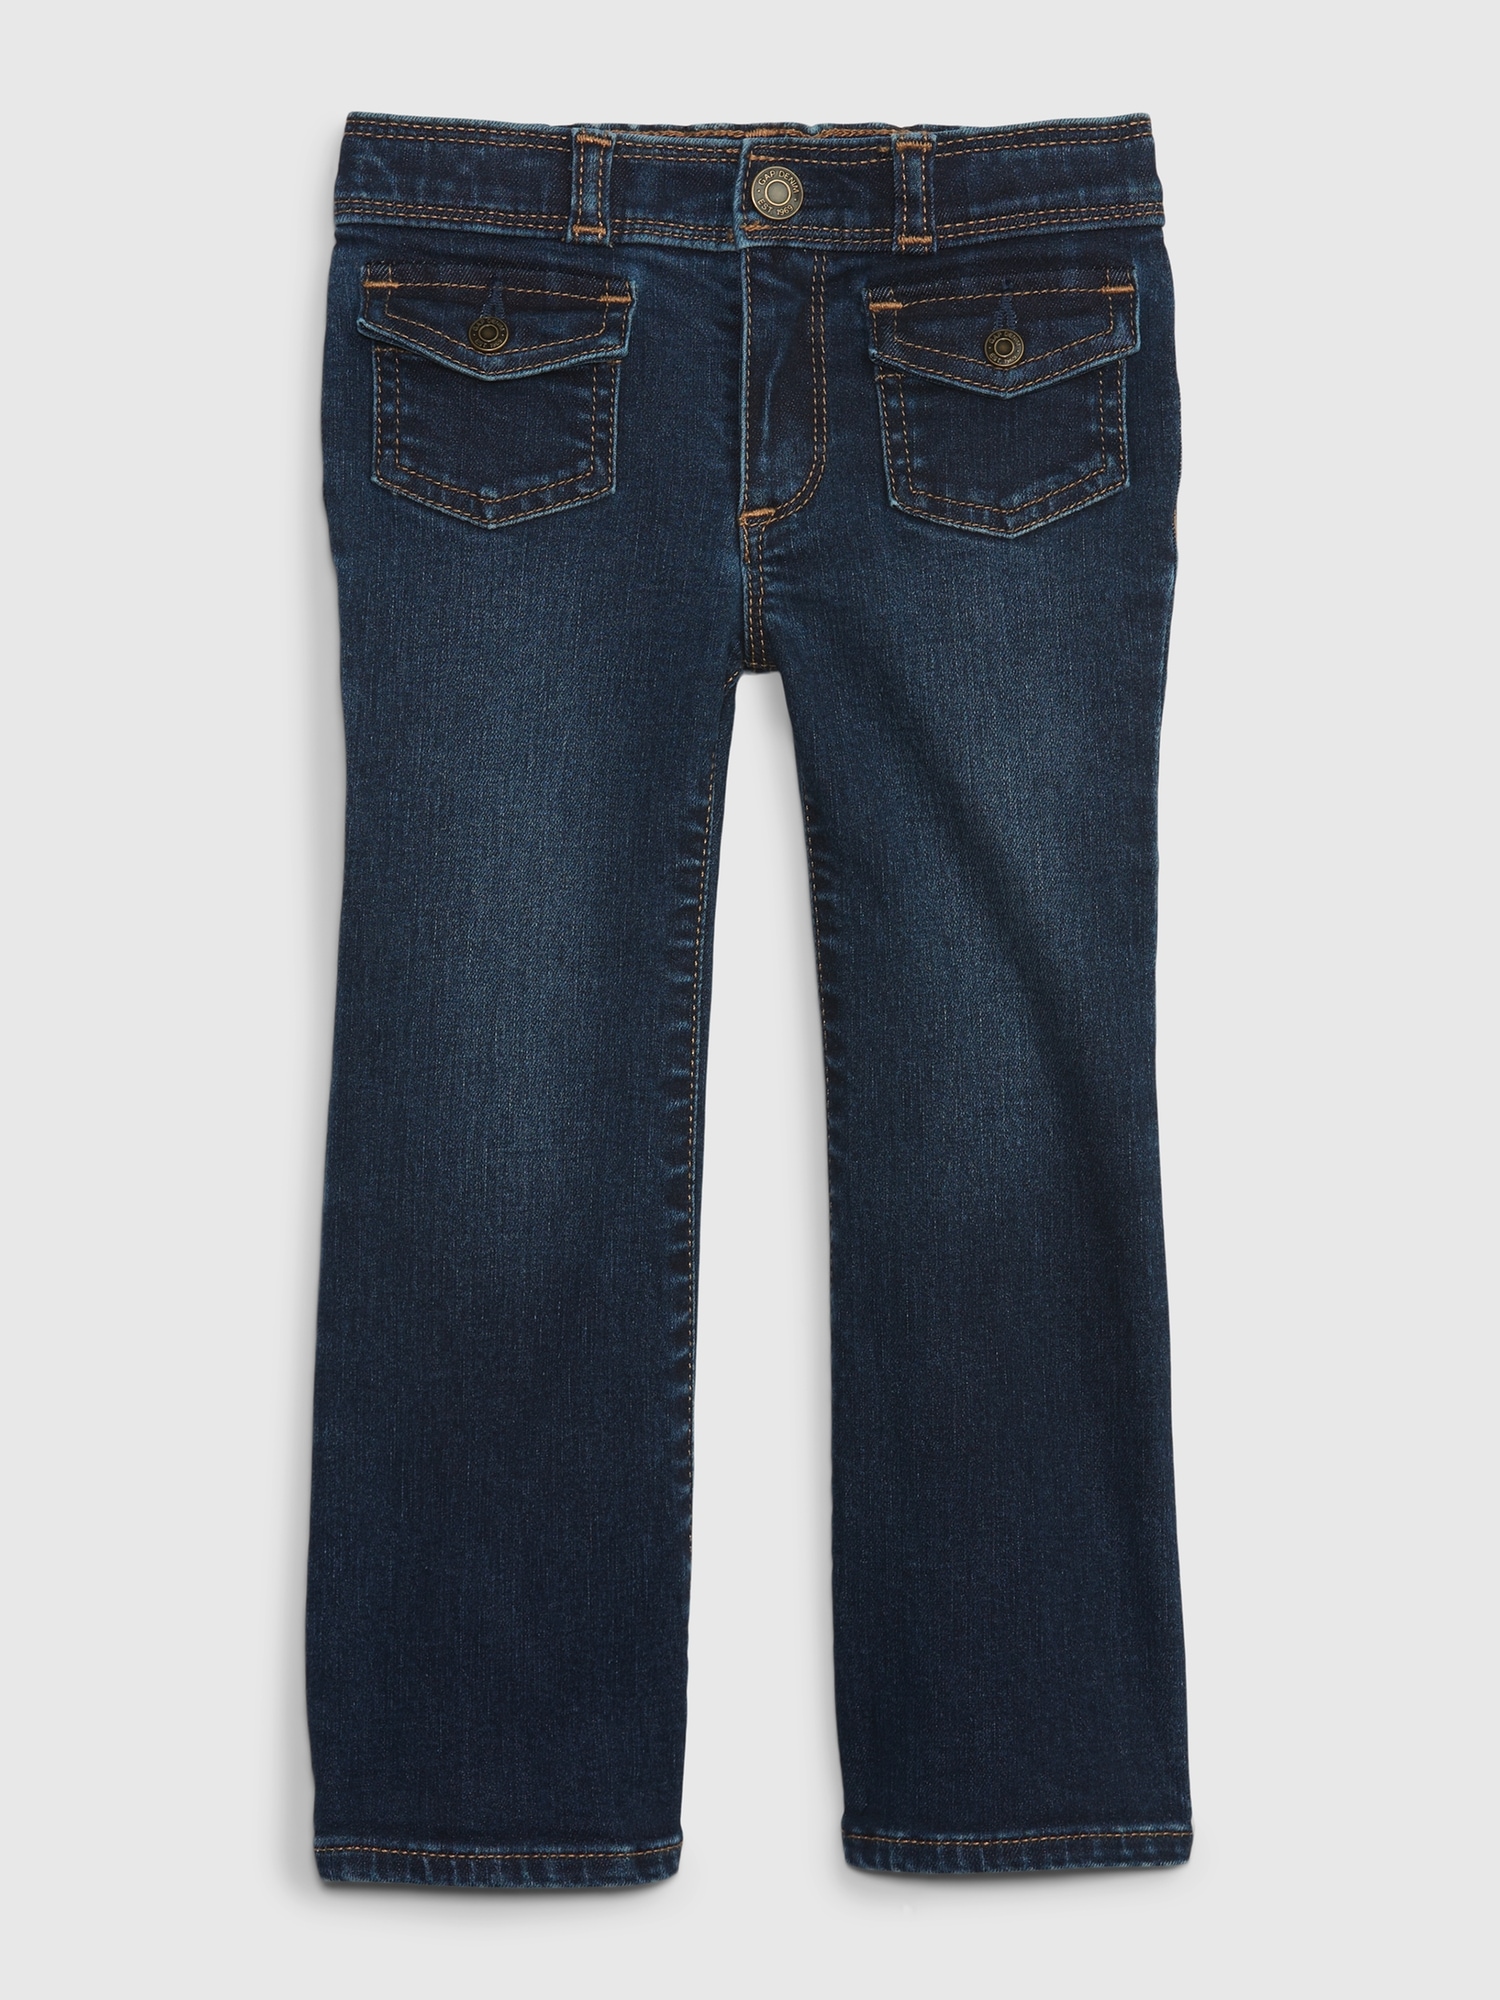 Gap Toddler 70s Flare Jeans